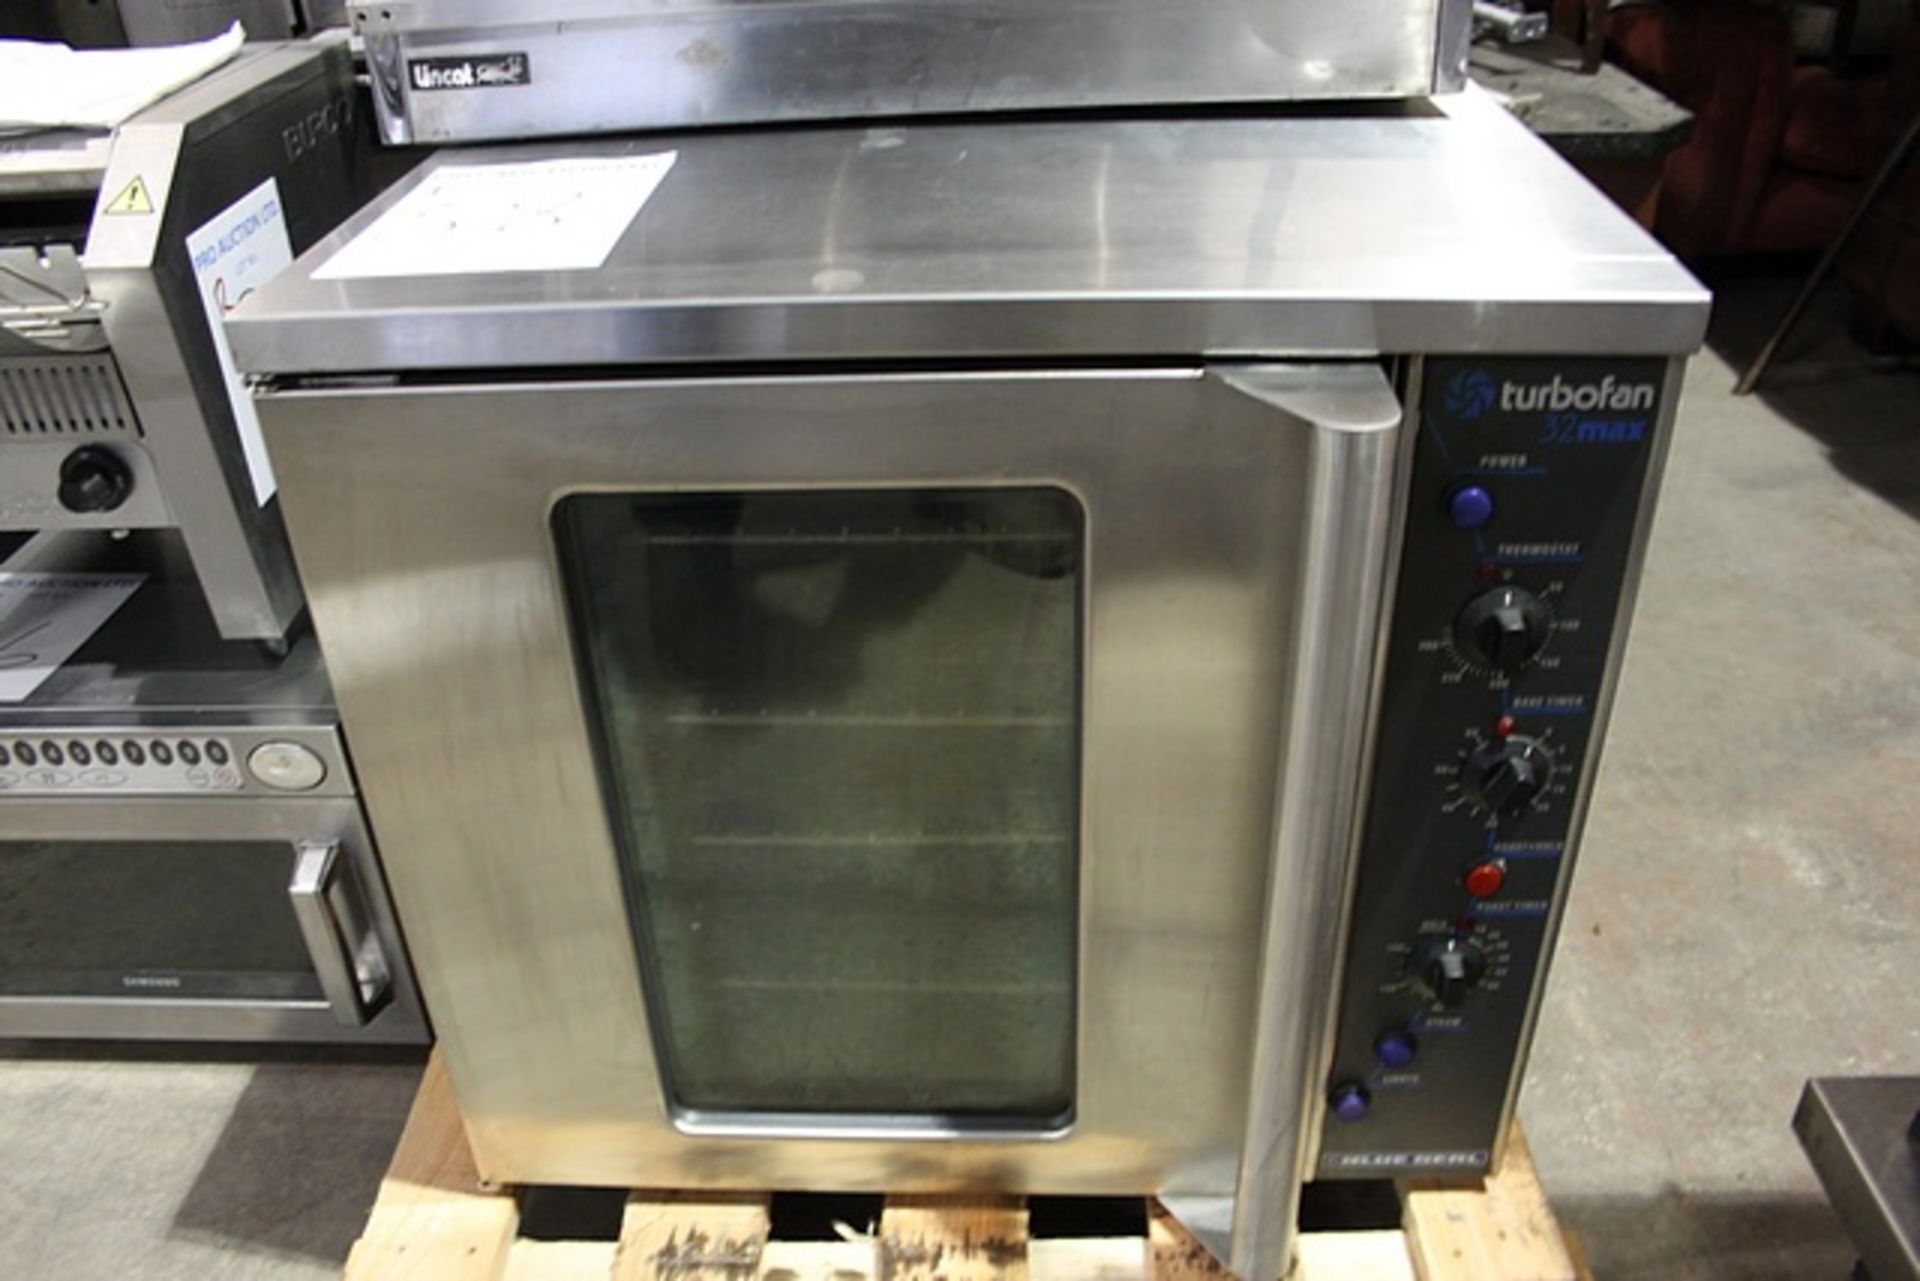 Blue Seal Turbofan 32 Max convection oven reversing fan for even baking 4 tray capacity 60 minute